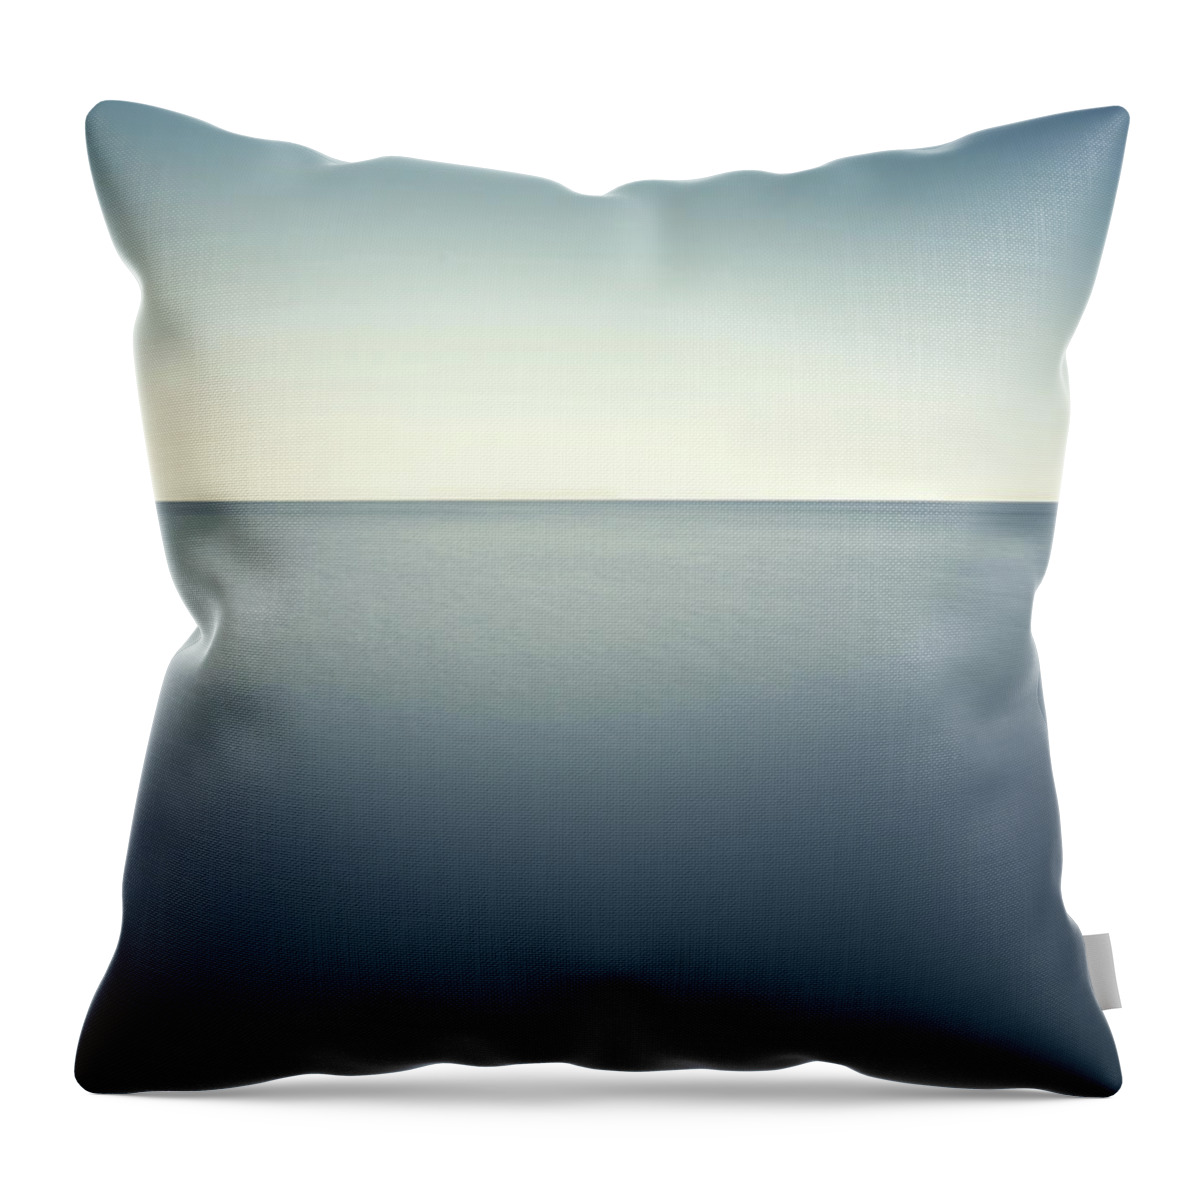 Scenics Throw Pillow featuring the photograph Deep Blue Sea by Ppampicture